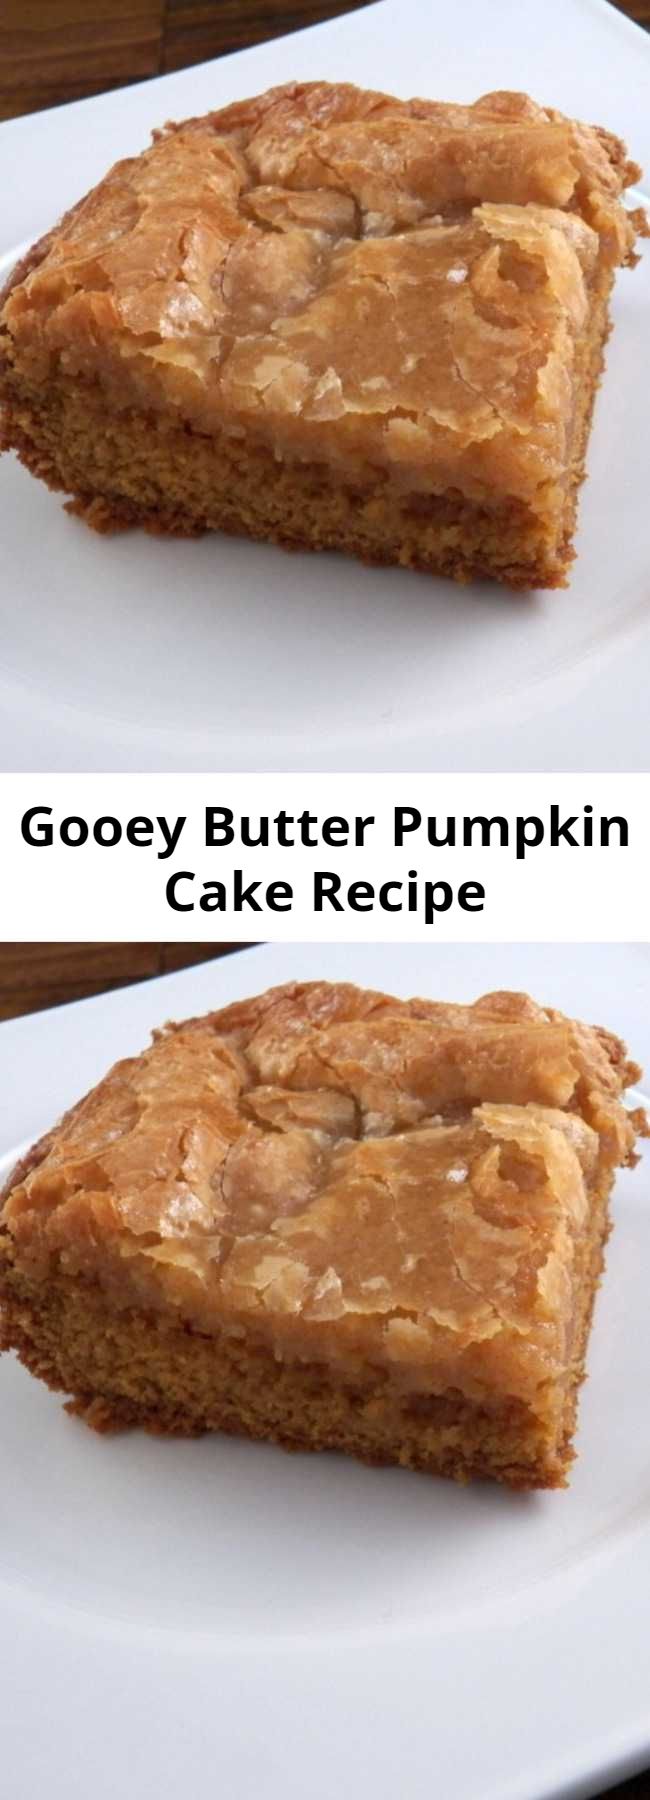 Gooey Butter Pumpkin Cake Recipe - This recipe comes together in minutes and then you just bake, cool and serve. How much easier can you get in life and on top of that it is so unbelievably good that it will definitely impress your friends and family.